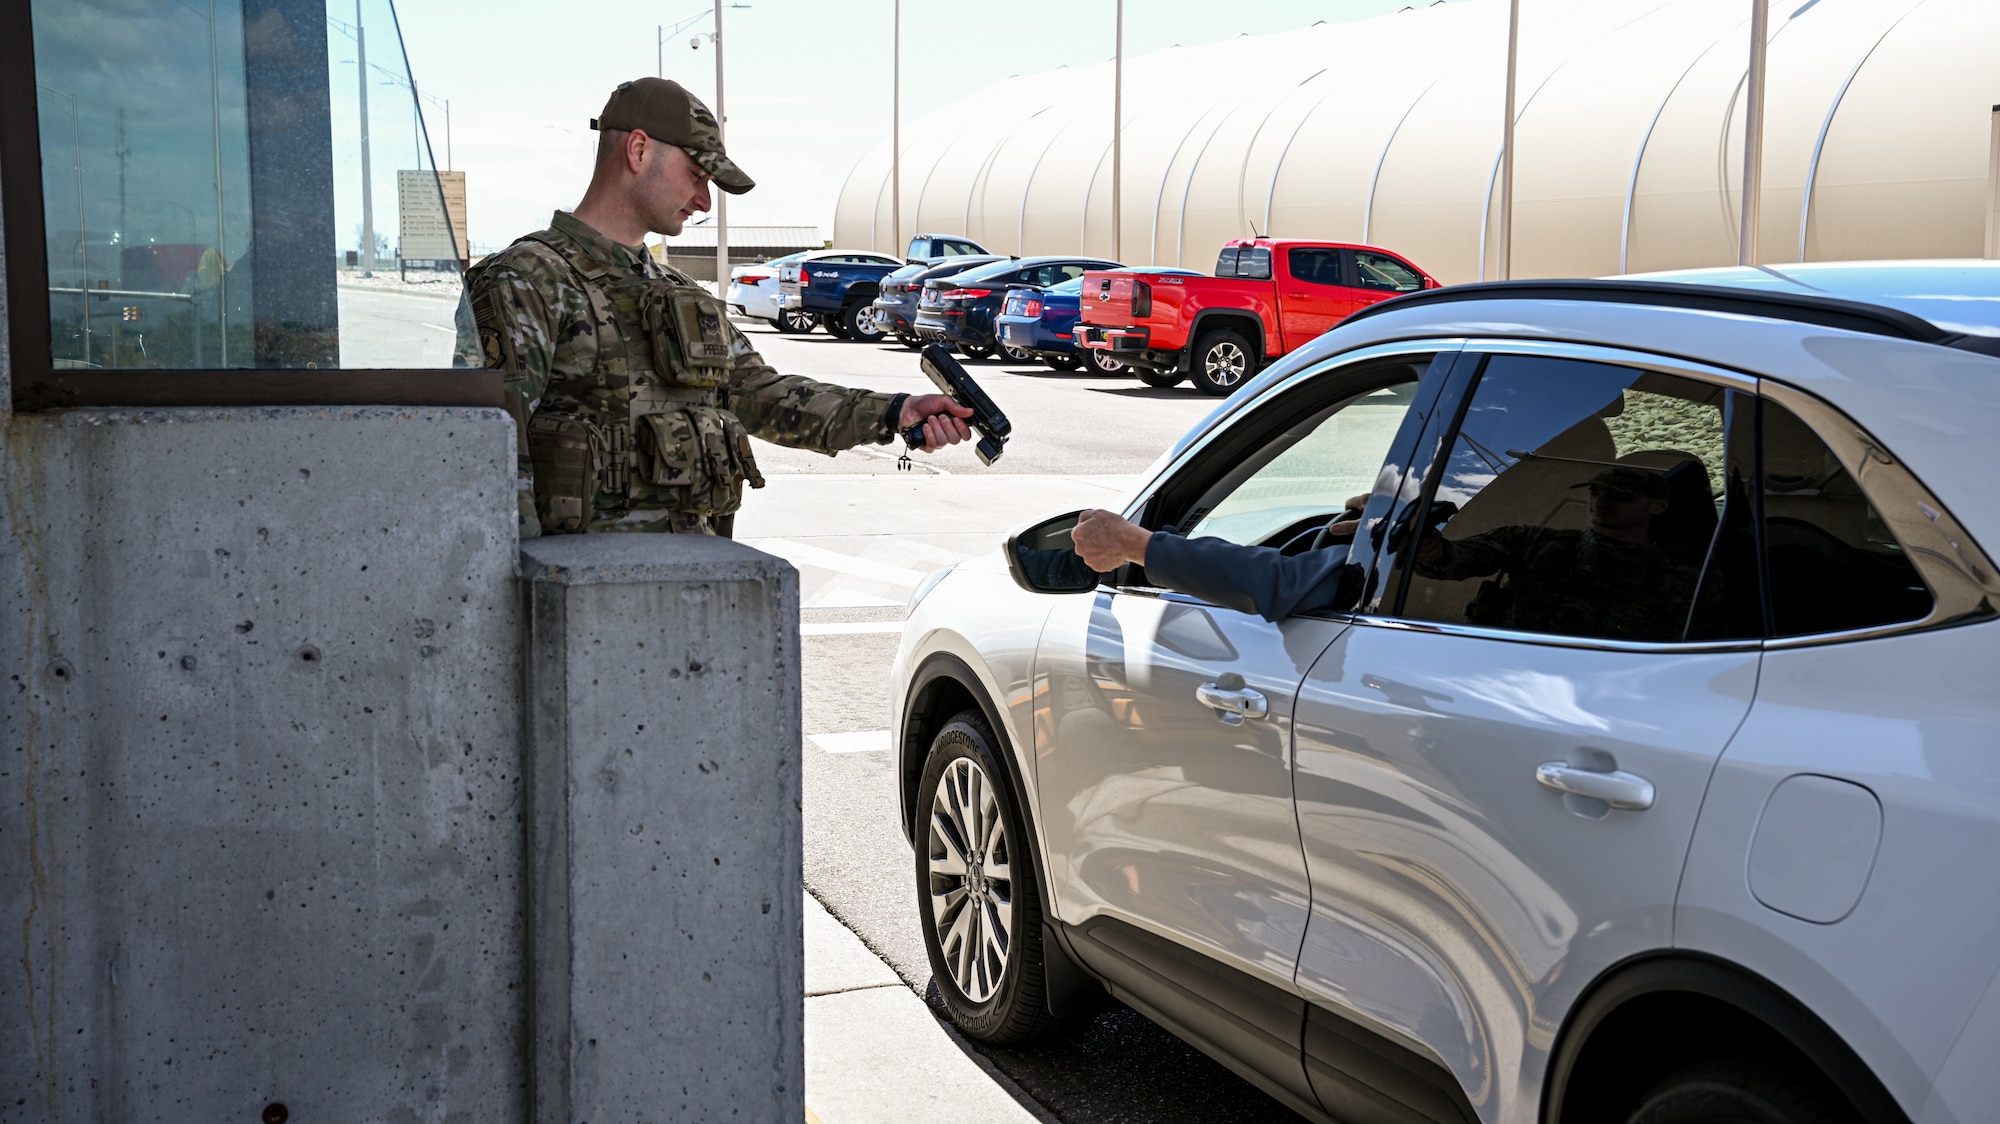 Staff Sgt. Isaac Preuss, 75th Security Forces Squadron, scans an identification card of the driver of a vehicle.